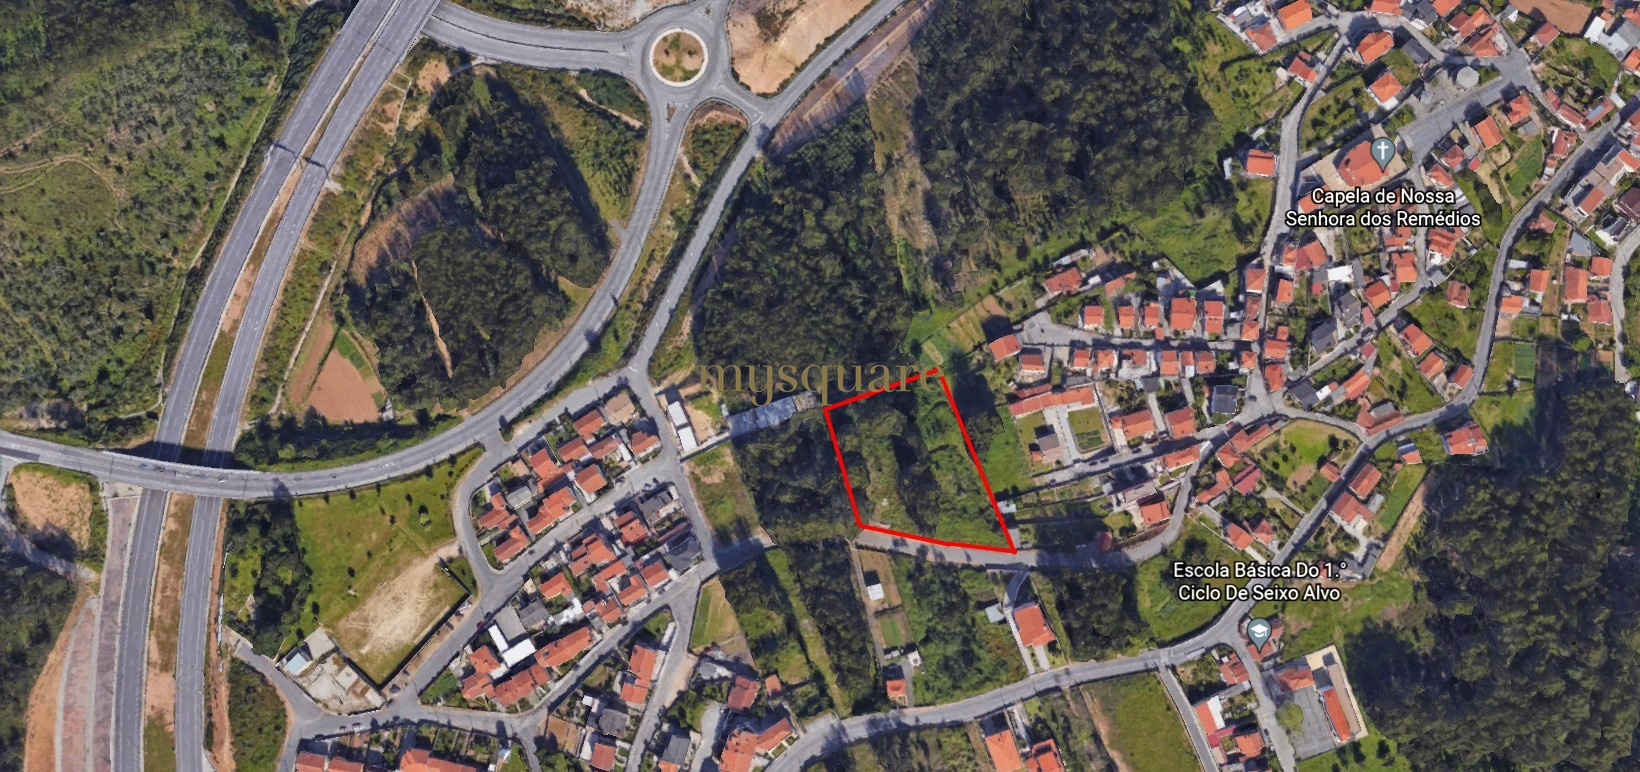 Urban land for construction of 12 Floors Houses - Olival, Gaia